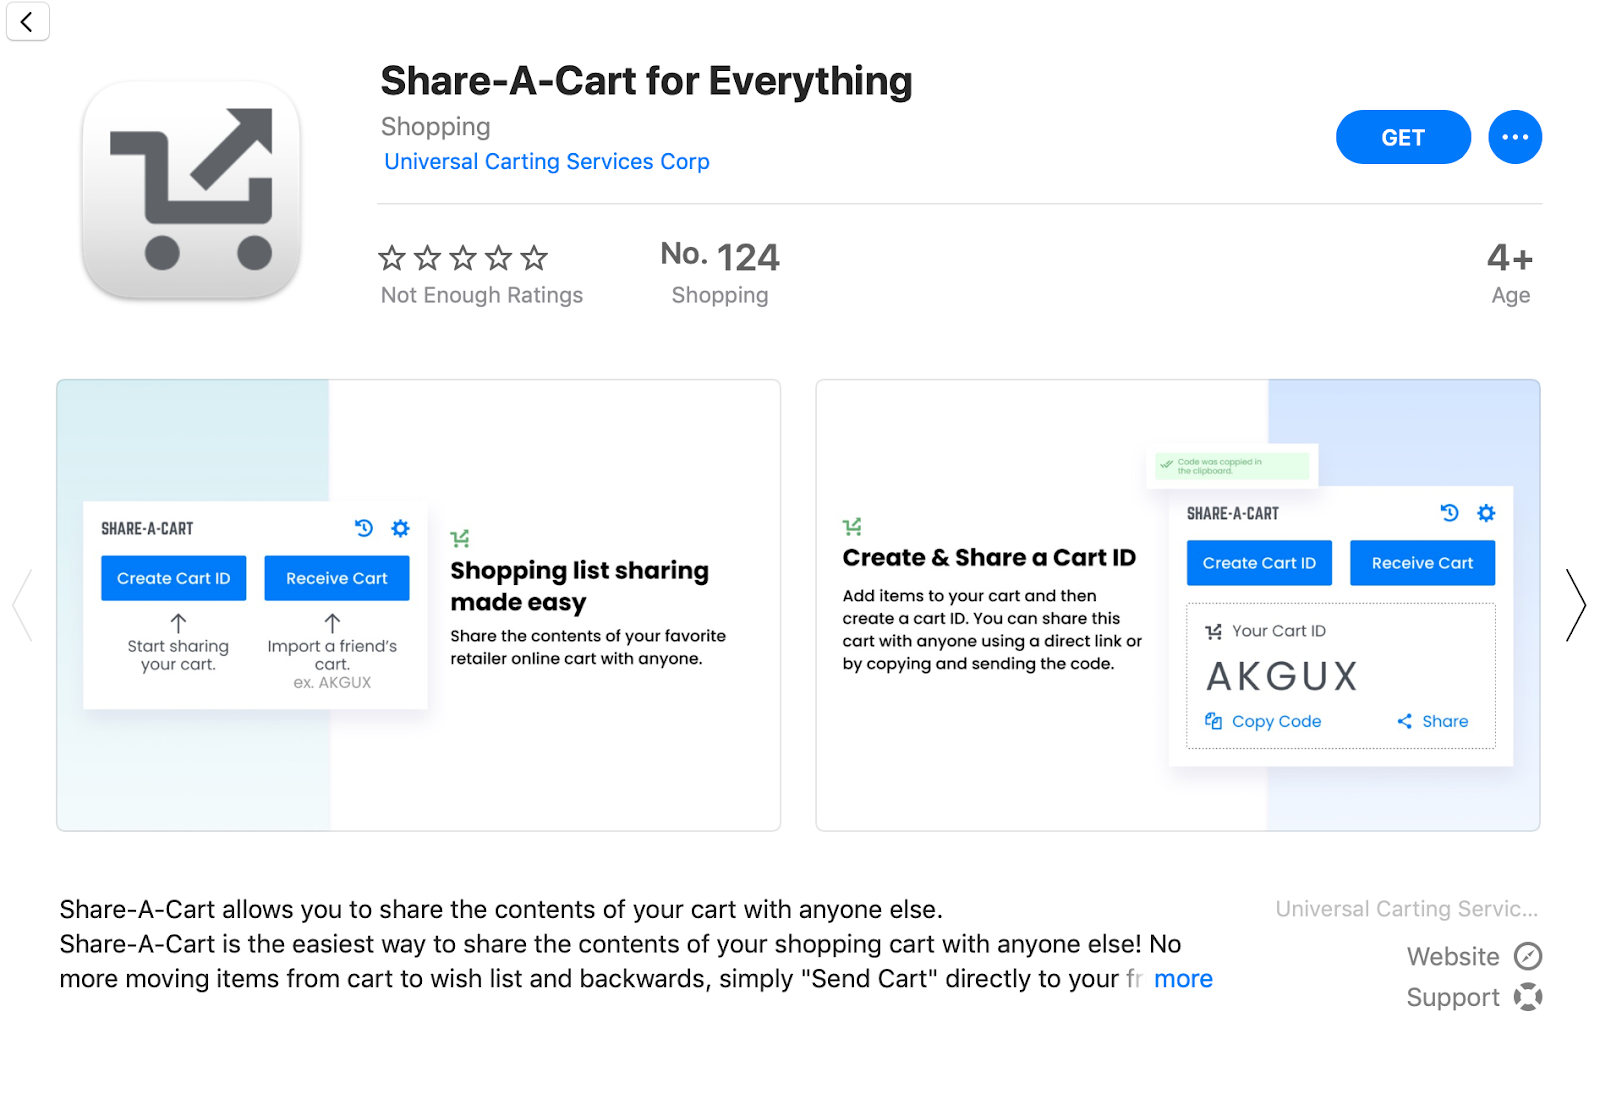 Use the Share-A-Cart extension5